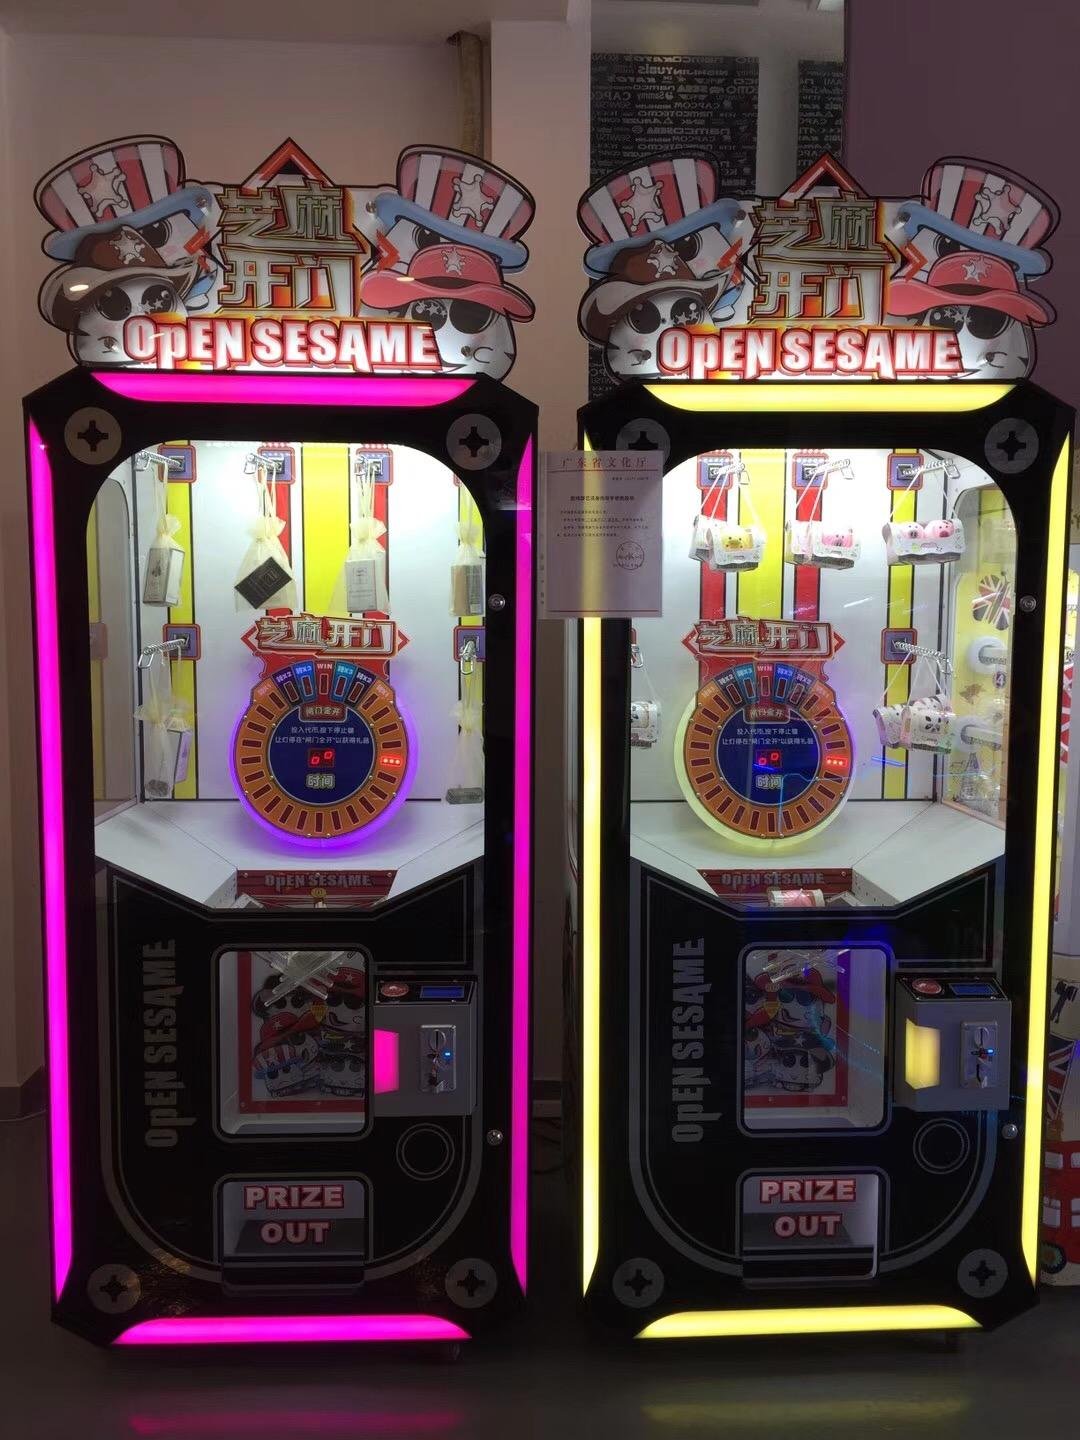  Open sesame Coin Operated Indoor Shopping Mall Prize Machine 4